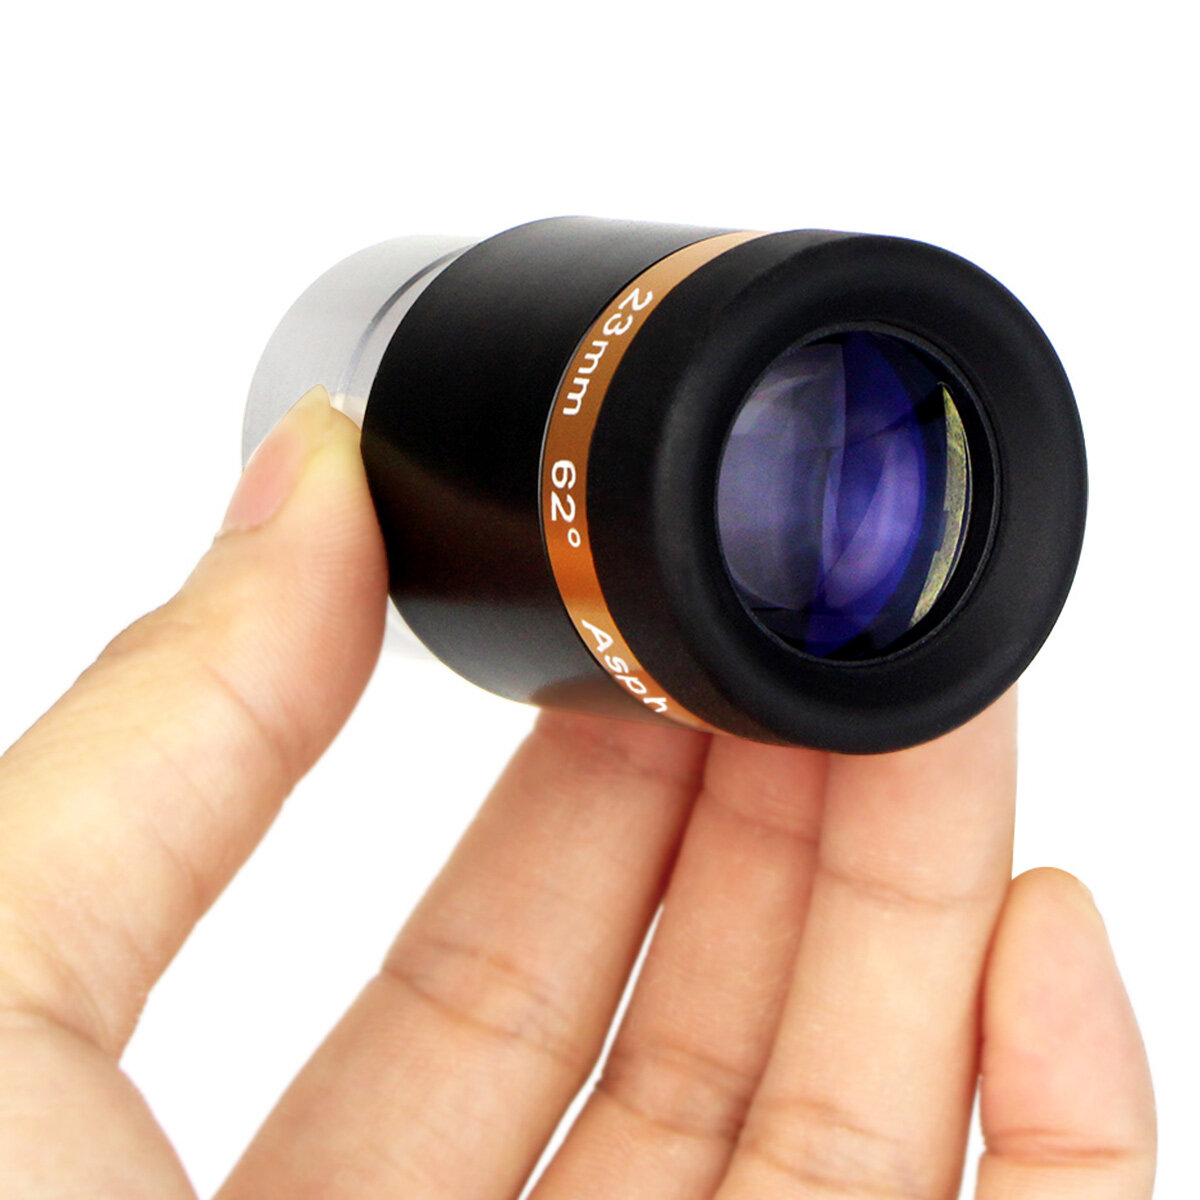 

SVBONY Lens 23mm Wide Angle 62°Aspheric Eyepiece HD Fully Coated for 1.25" 31.7mm Astronomic Telescopes -Black